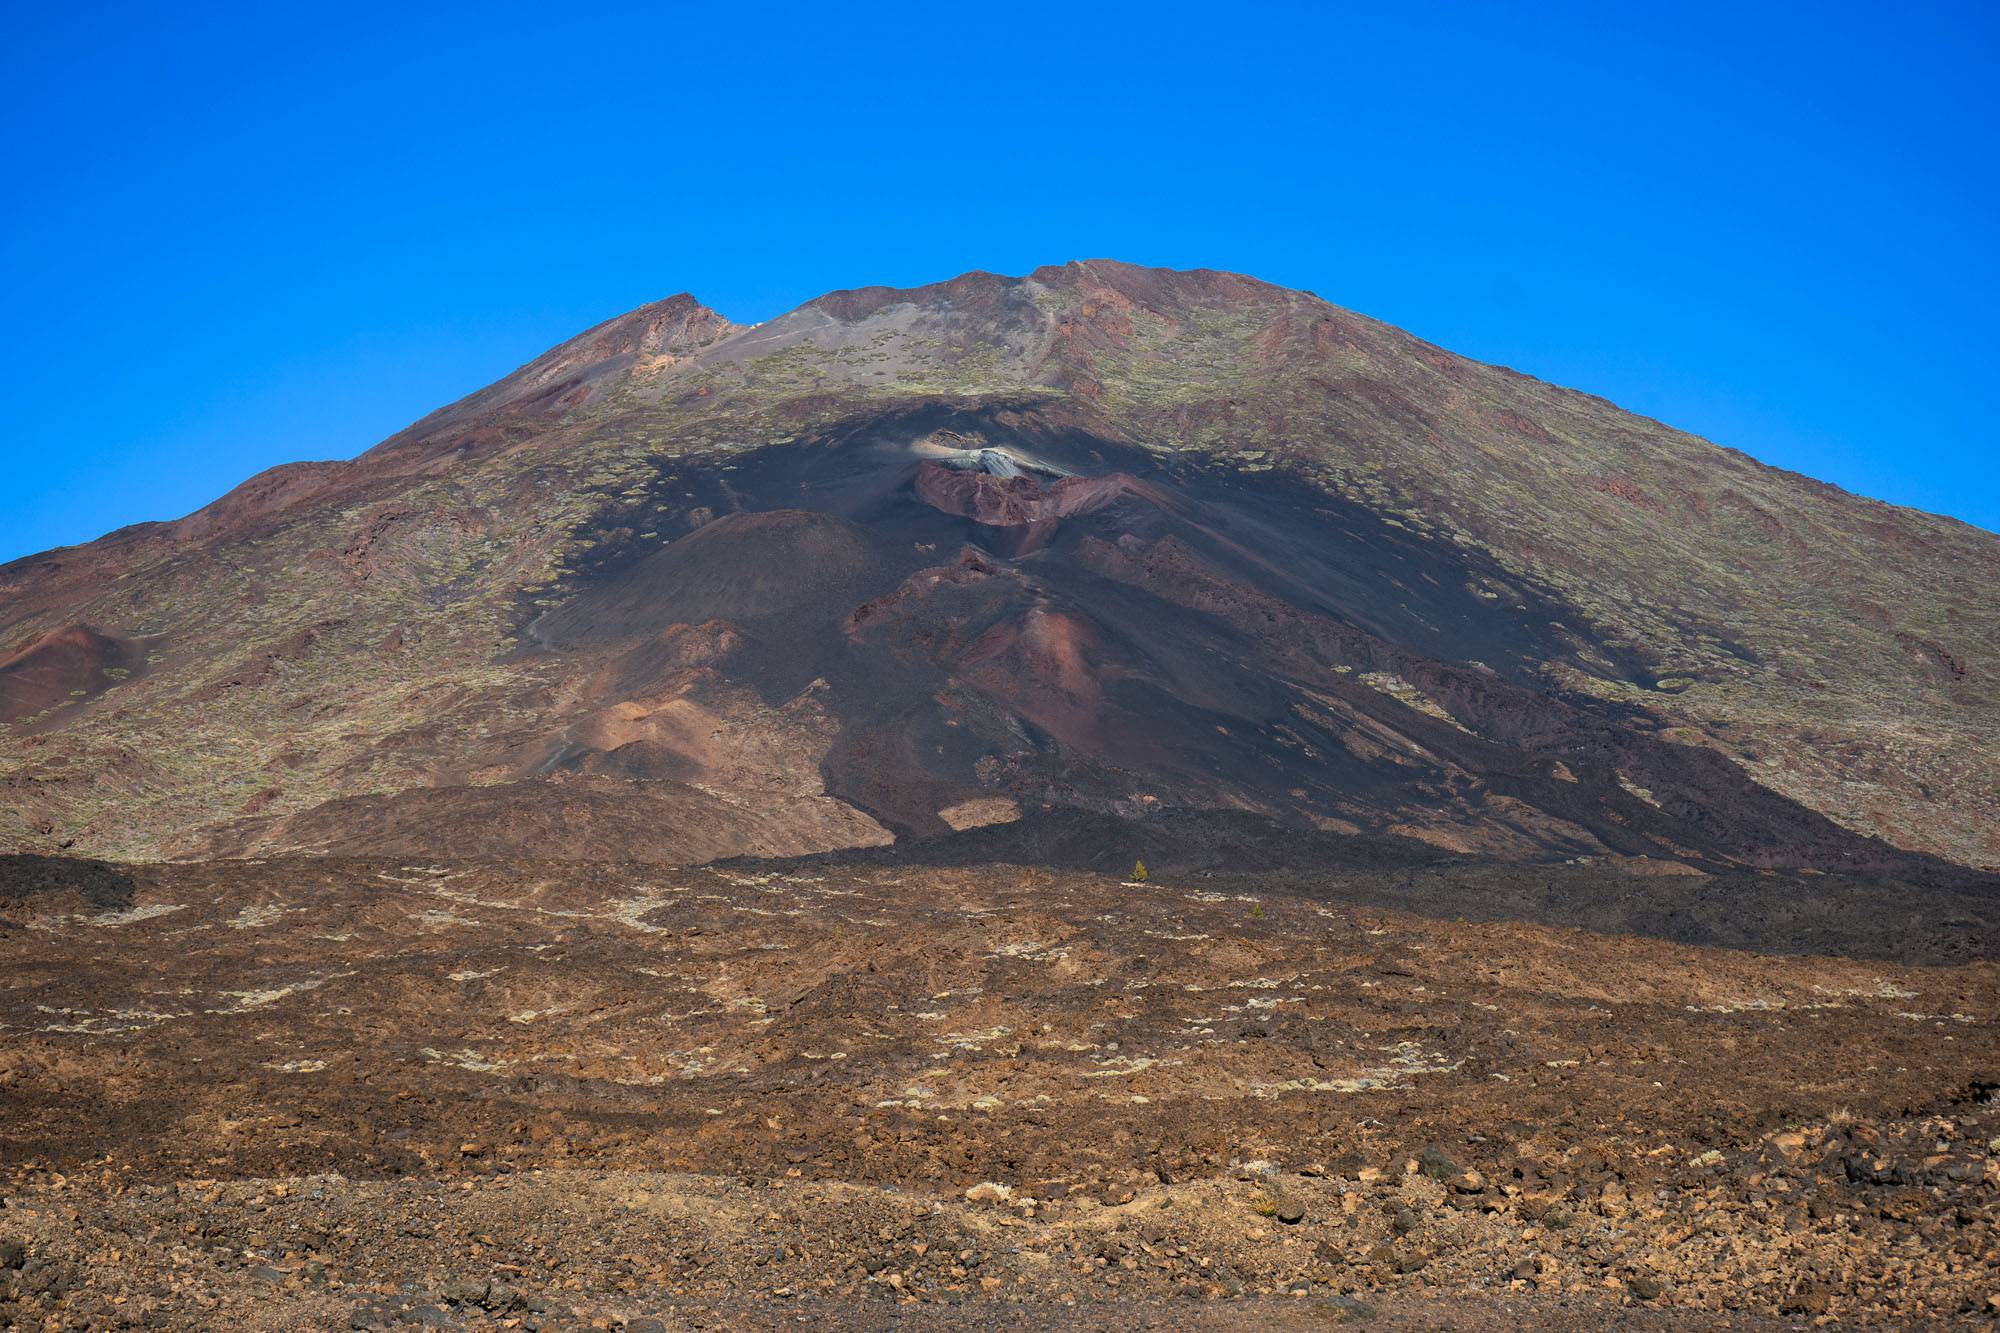 A New View of the Teide: From the West
